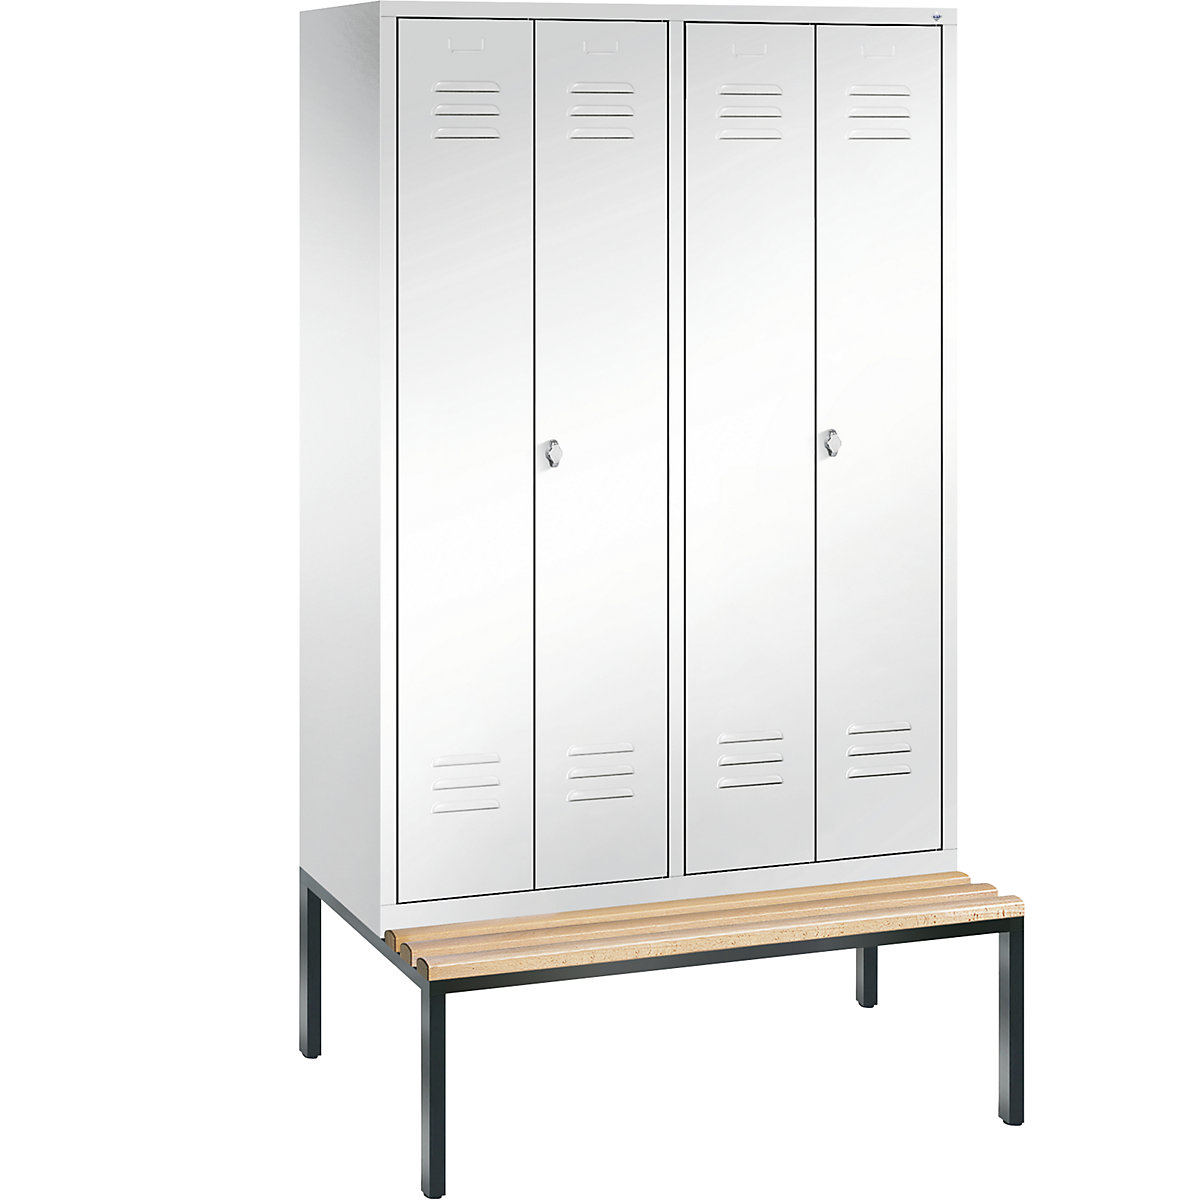 CLASSIC cloakroom locker with bench mounted underneath, doors close in the middle - C+P